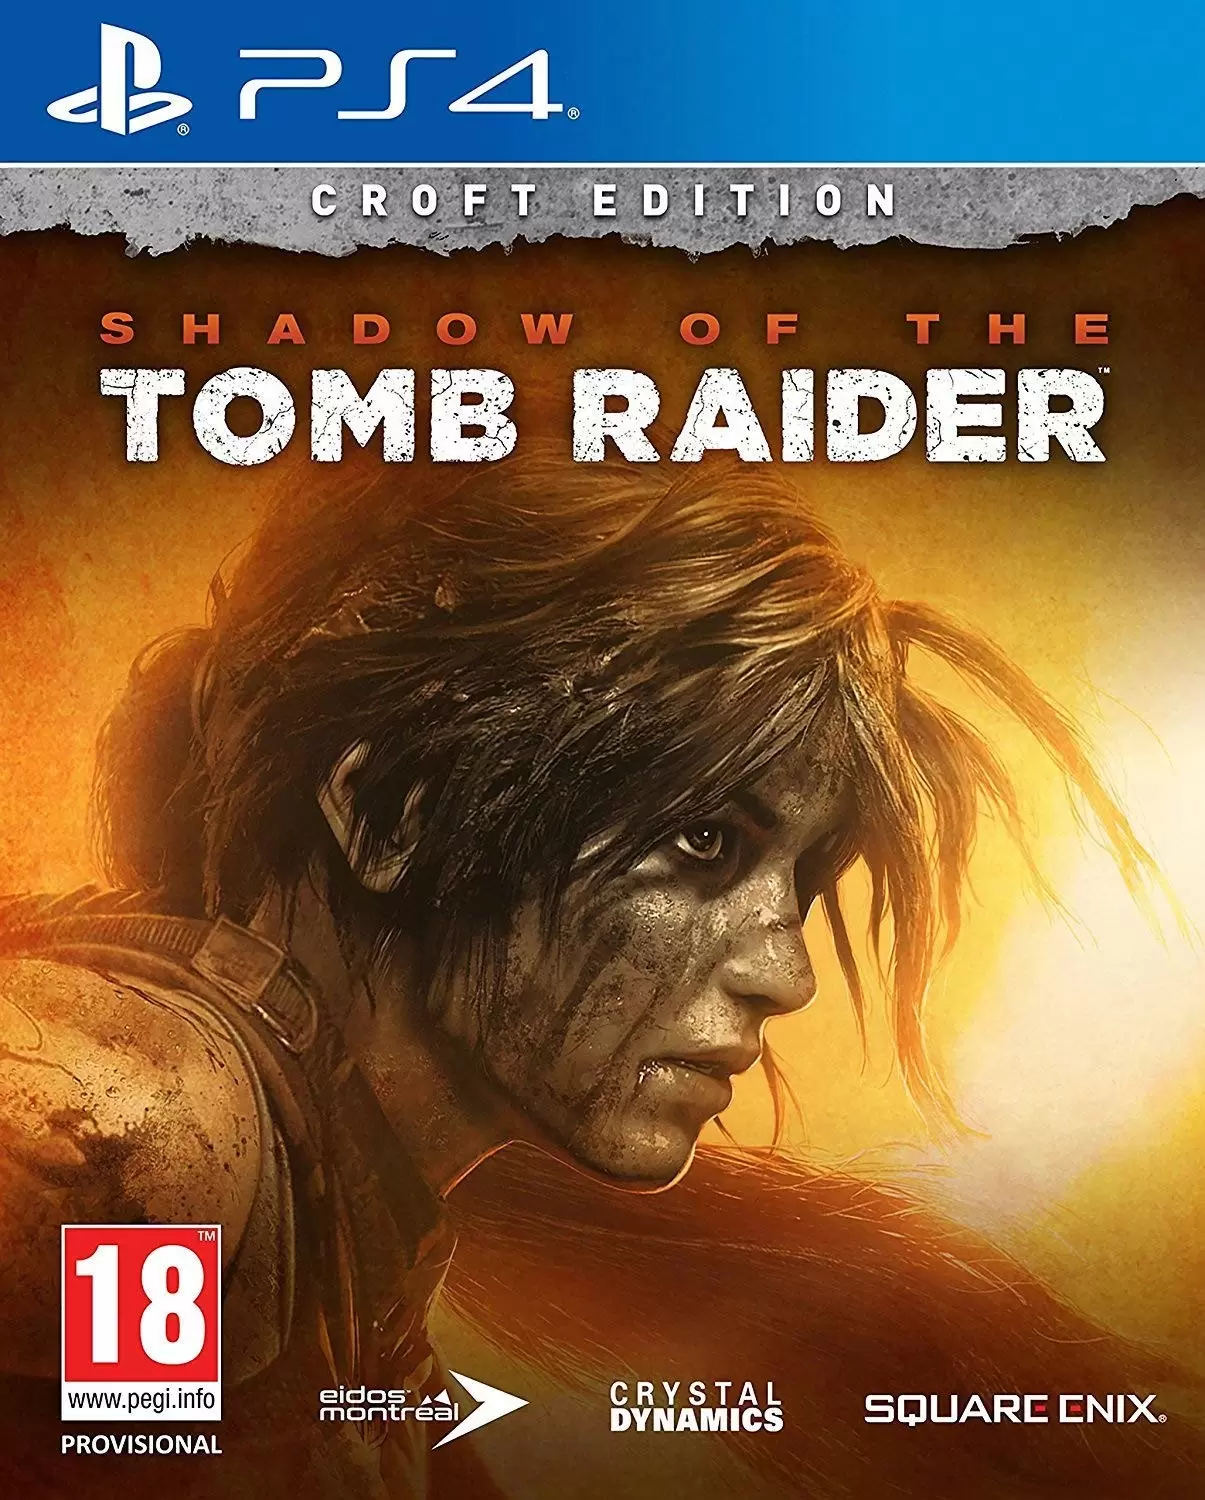 PS4 Games - Shadow of The Tomb Raider Croft Edition